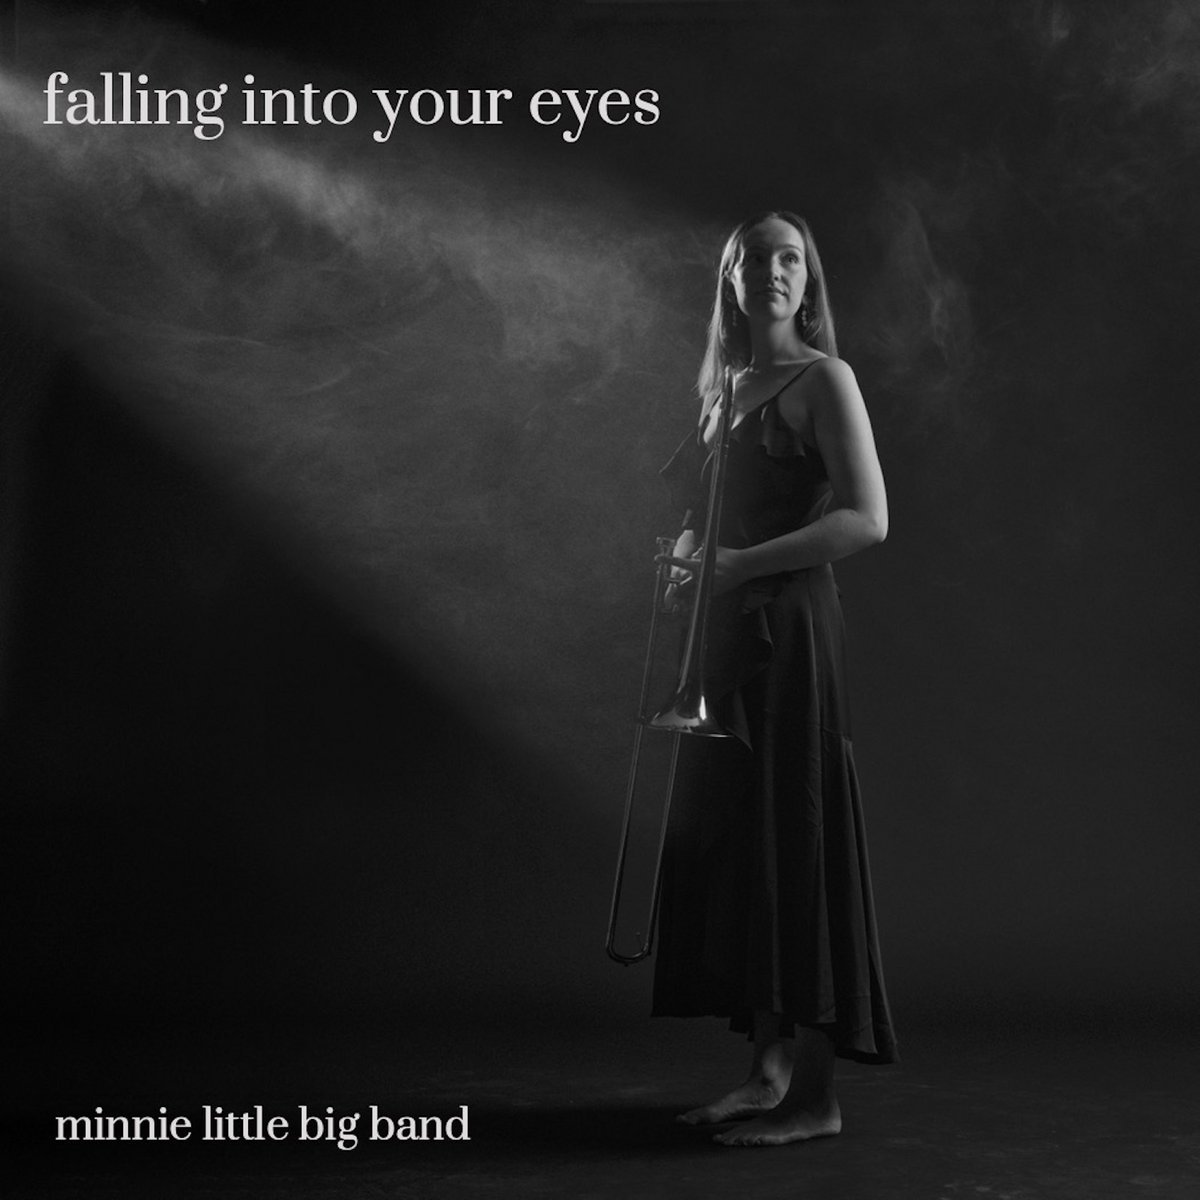 minnie little big band - "falling into your eyes" [Recorded, Mixed & Mastered (JP)]